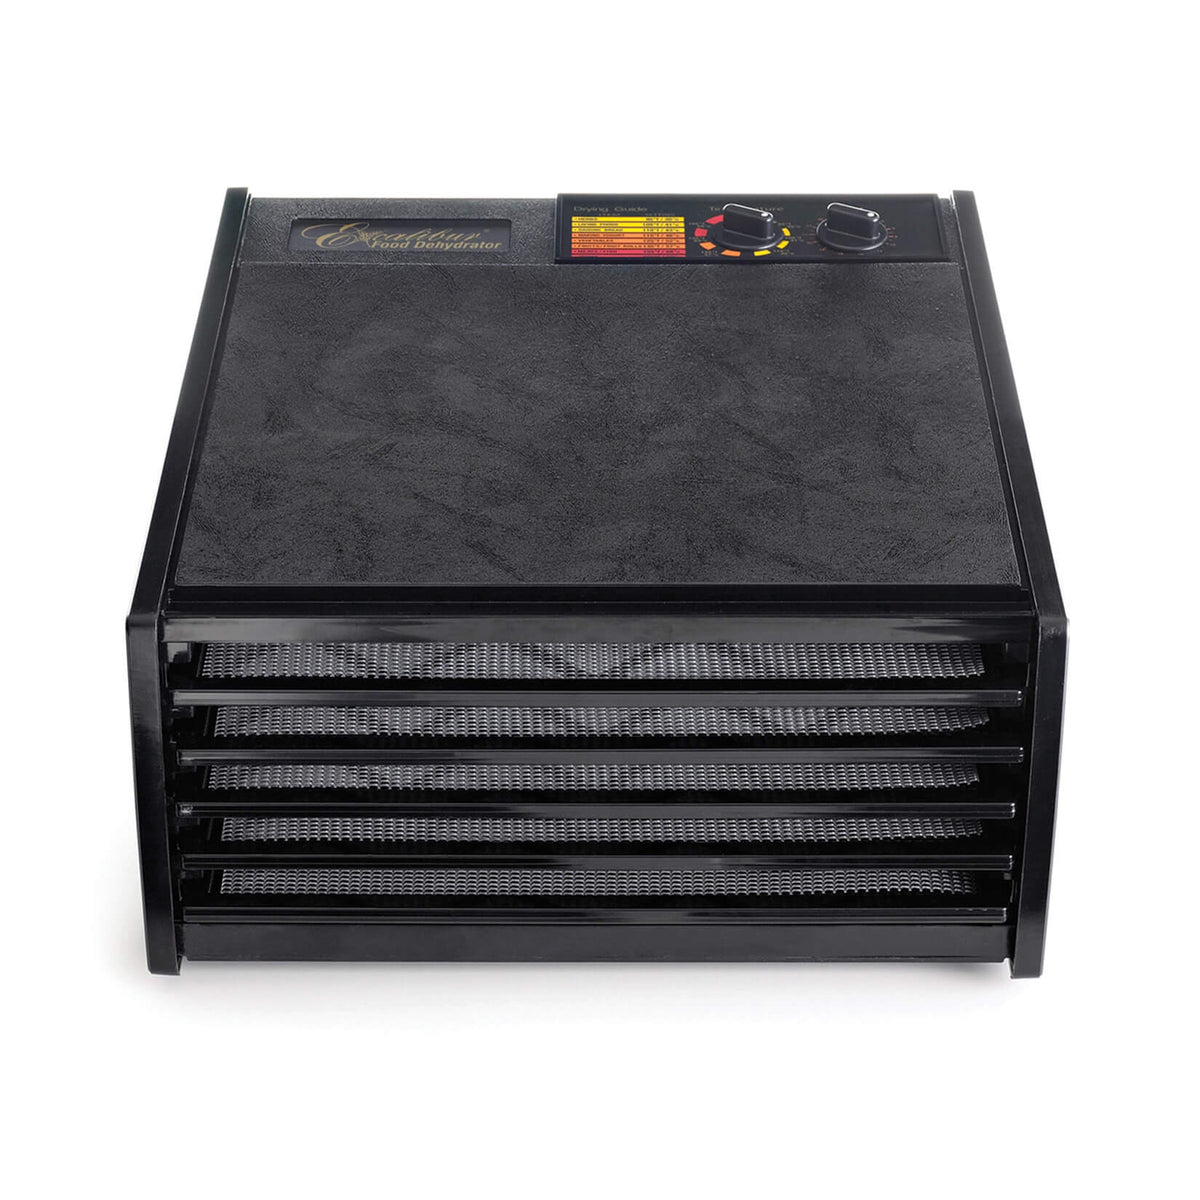 Excalibur 4526TCDB 5 tray dehydrator front view with trays in.